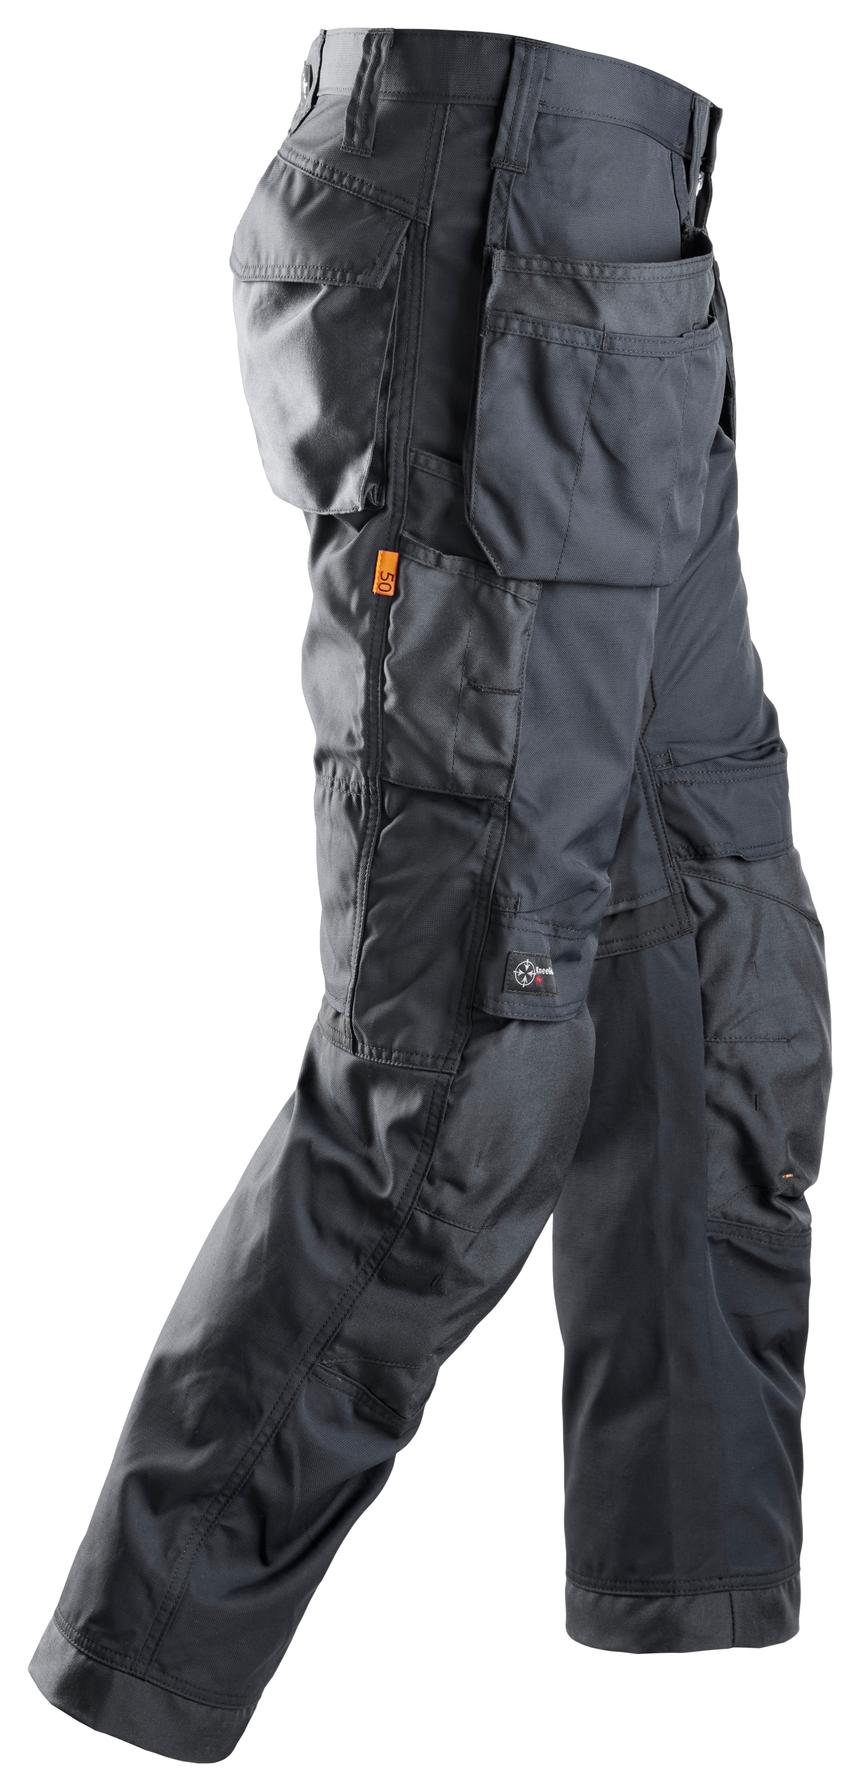 Snickers Workwear 6201 AllroundWork Pant + Holster Pockets - Steel Gre